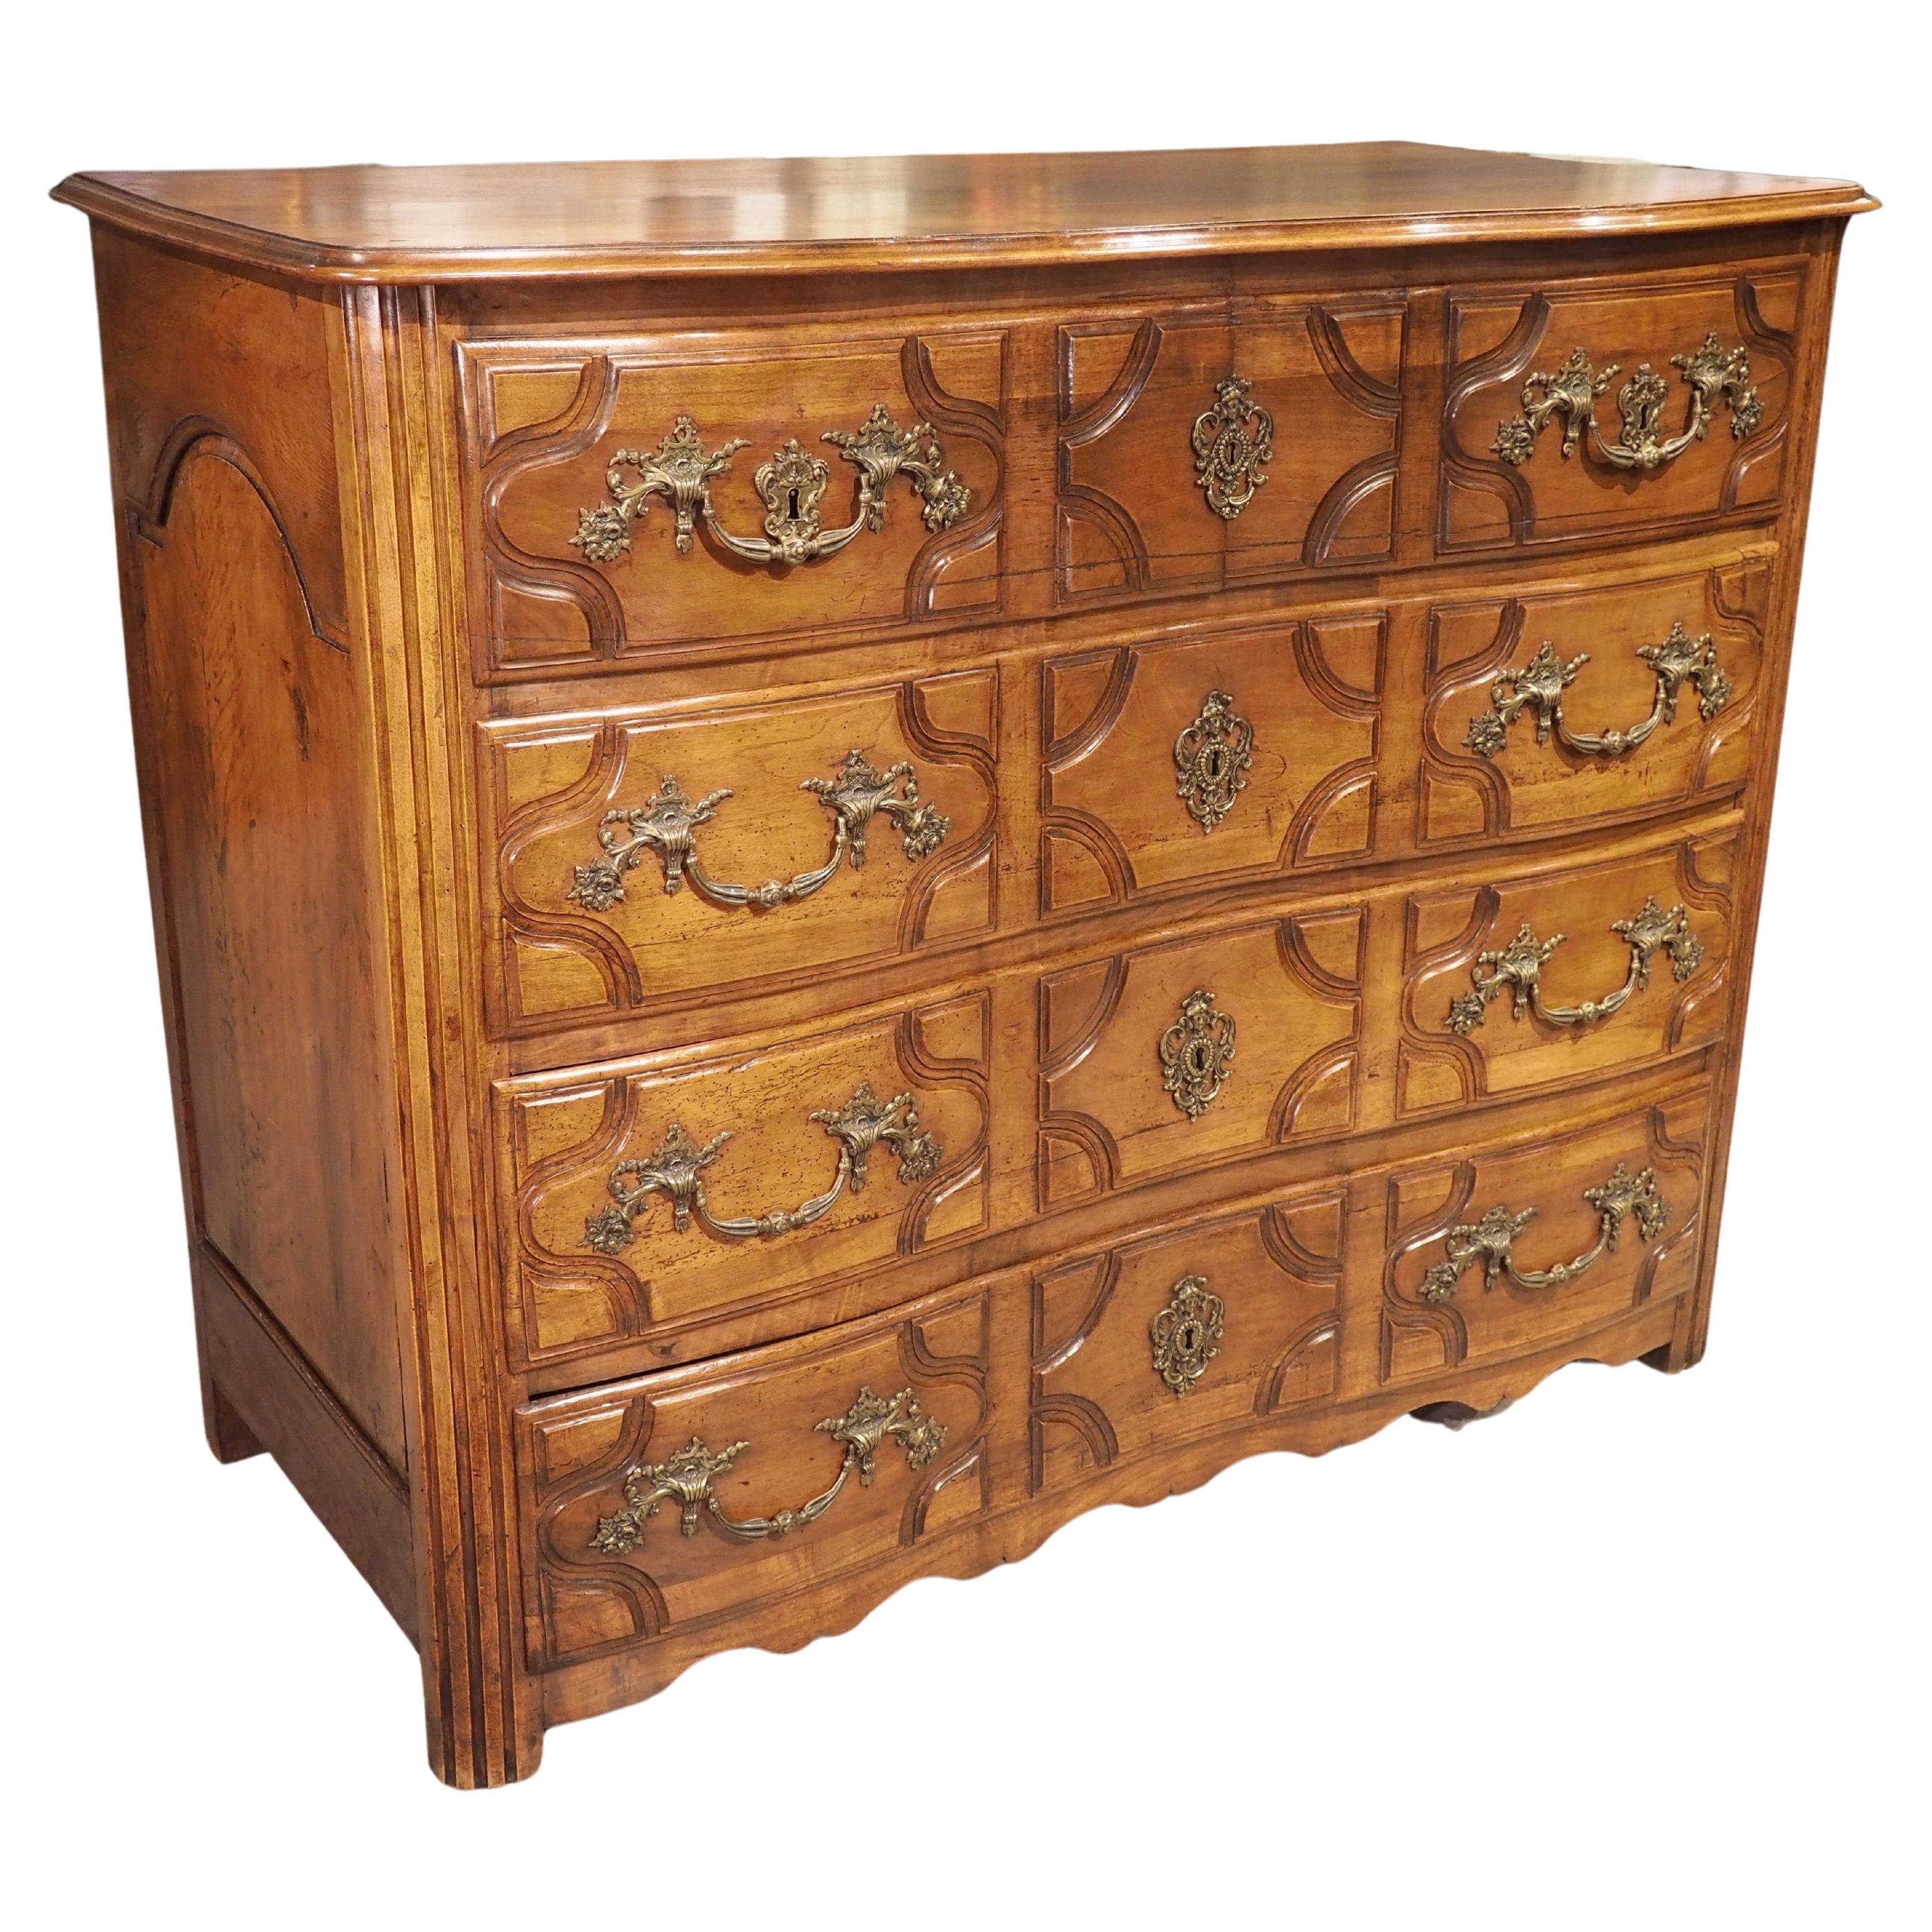 Rare 18th Century Walnut Wood Commode from the Île-de-France Region